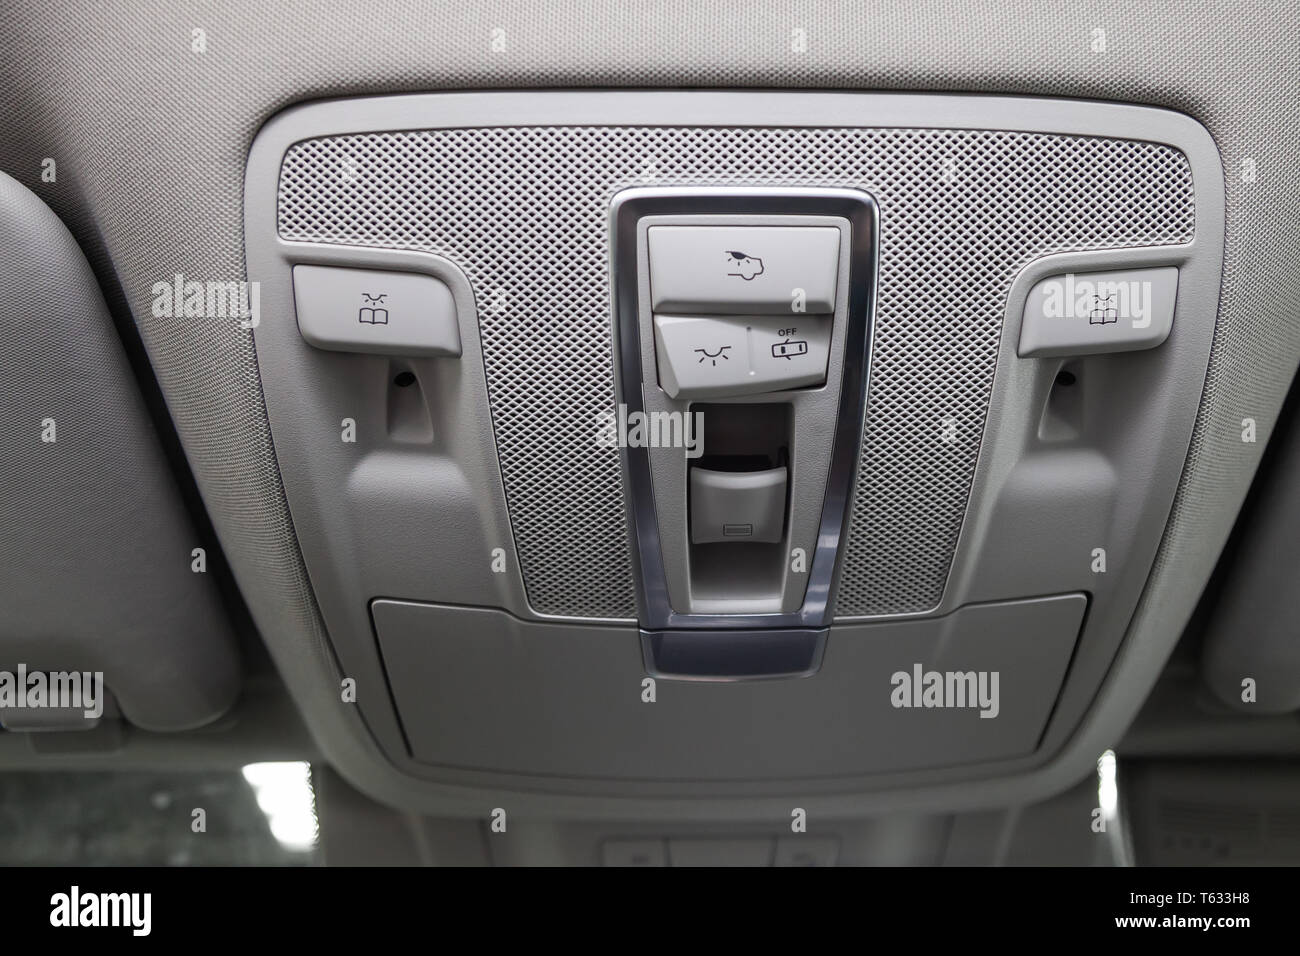 Close Up Interior View With Roof Light Control Dashboard And